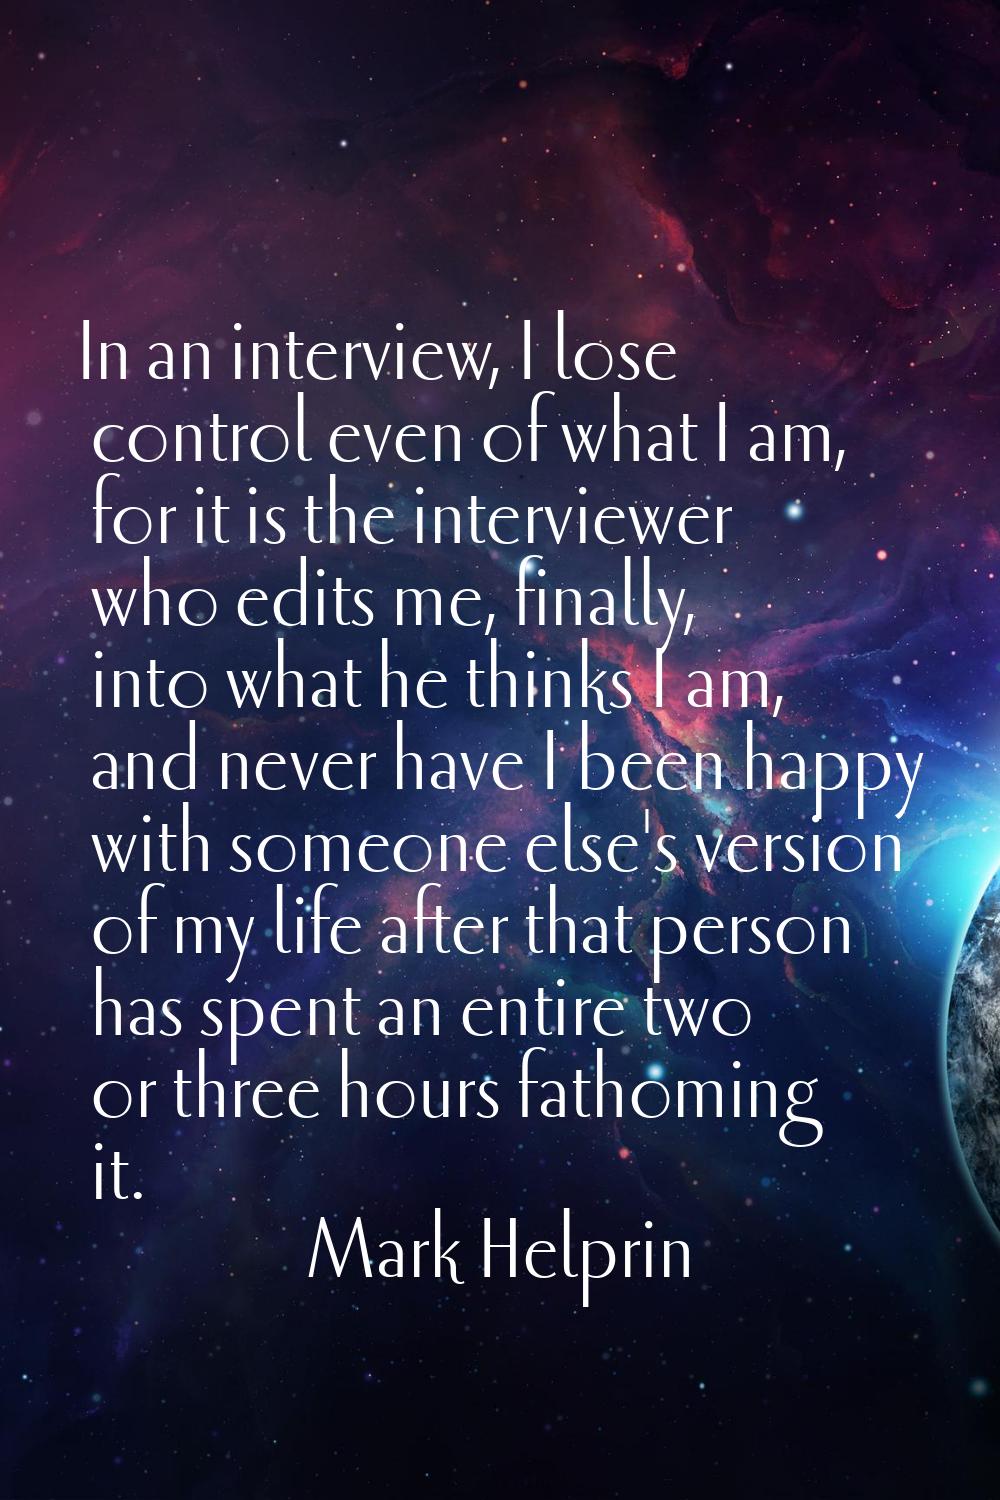 In an interview, I lose control even of what I am, for it is the interviewer who edits me, finally,